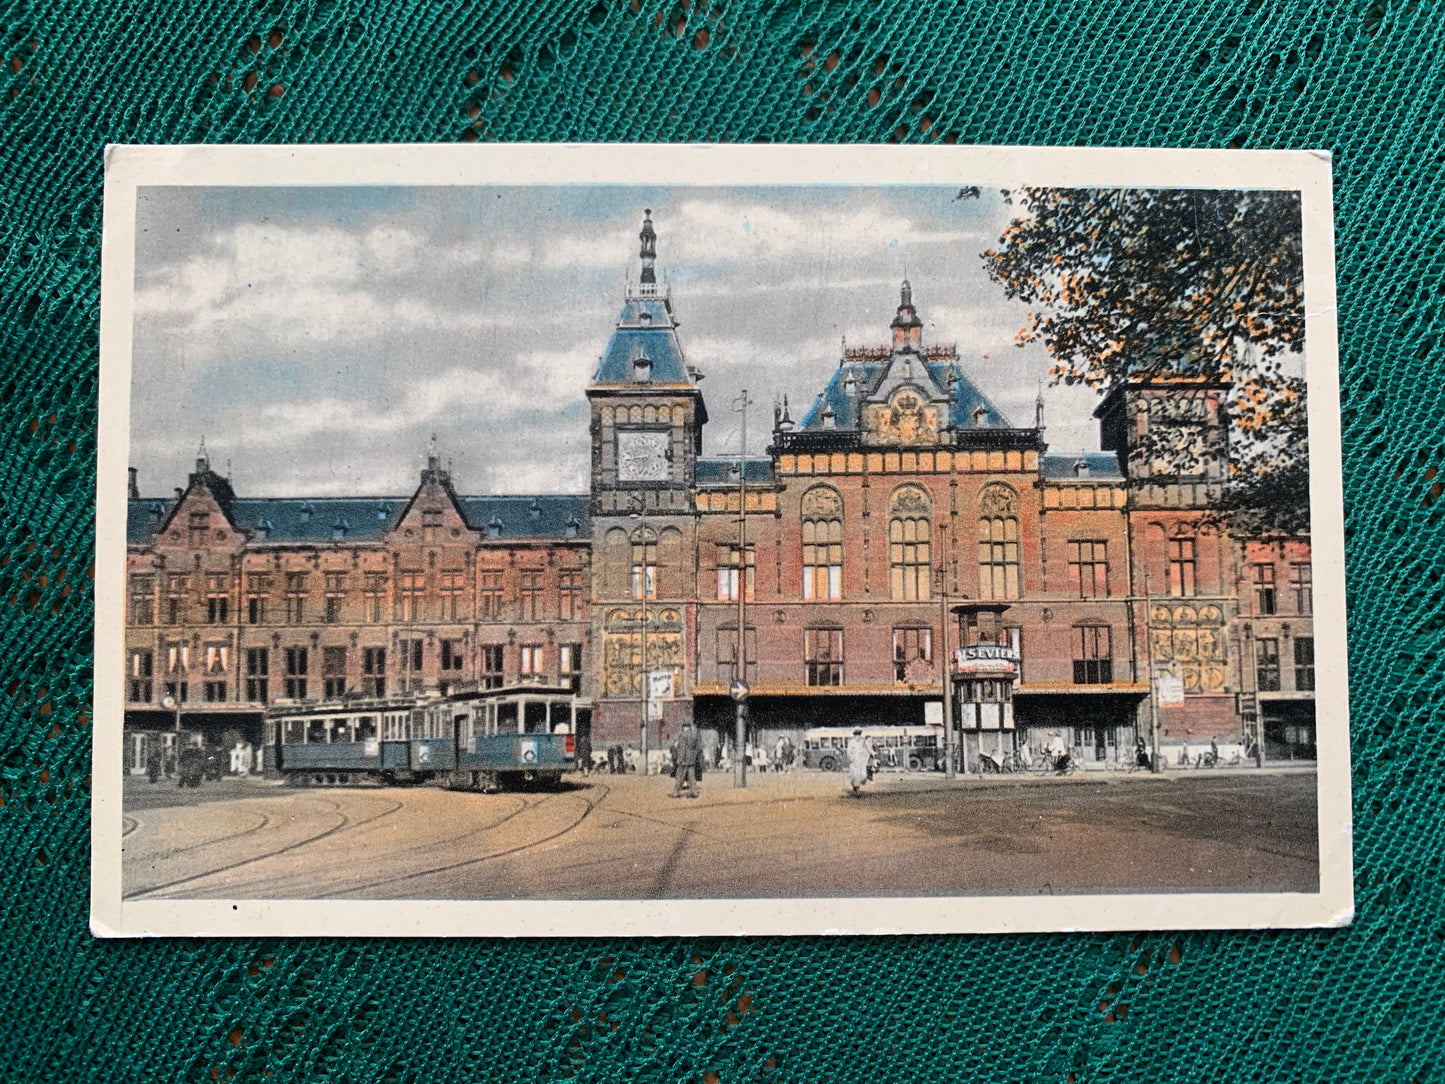 Old postcard - AMSTERDAM - CENTRAL STATION - Holland - Tram - early 1900's